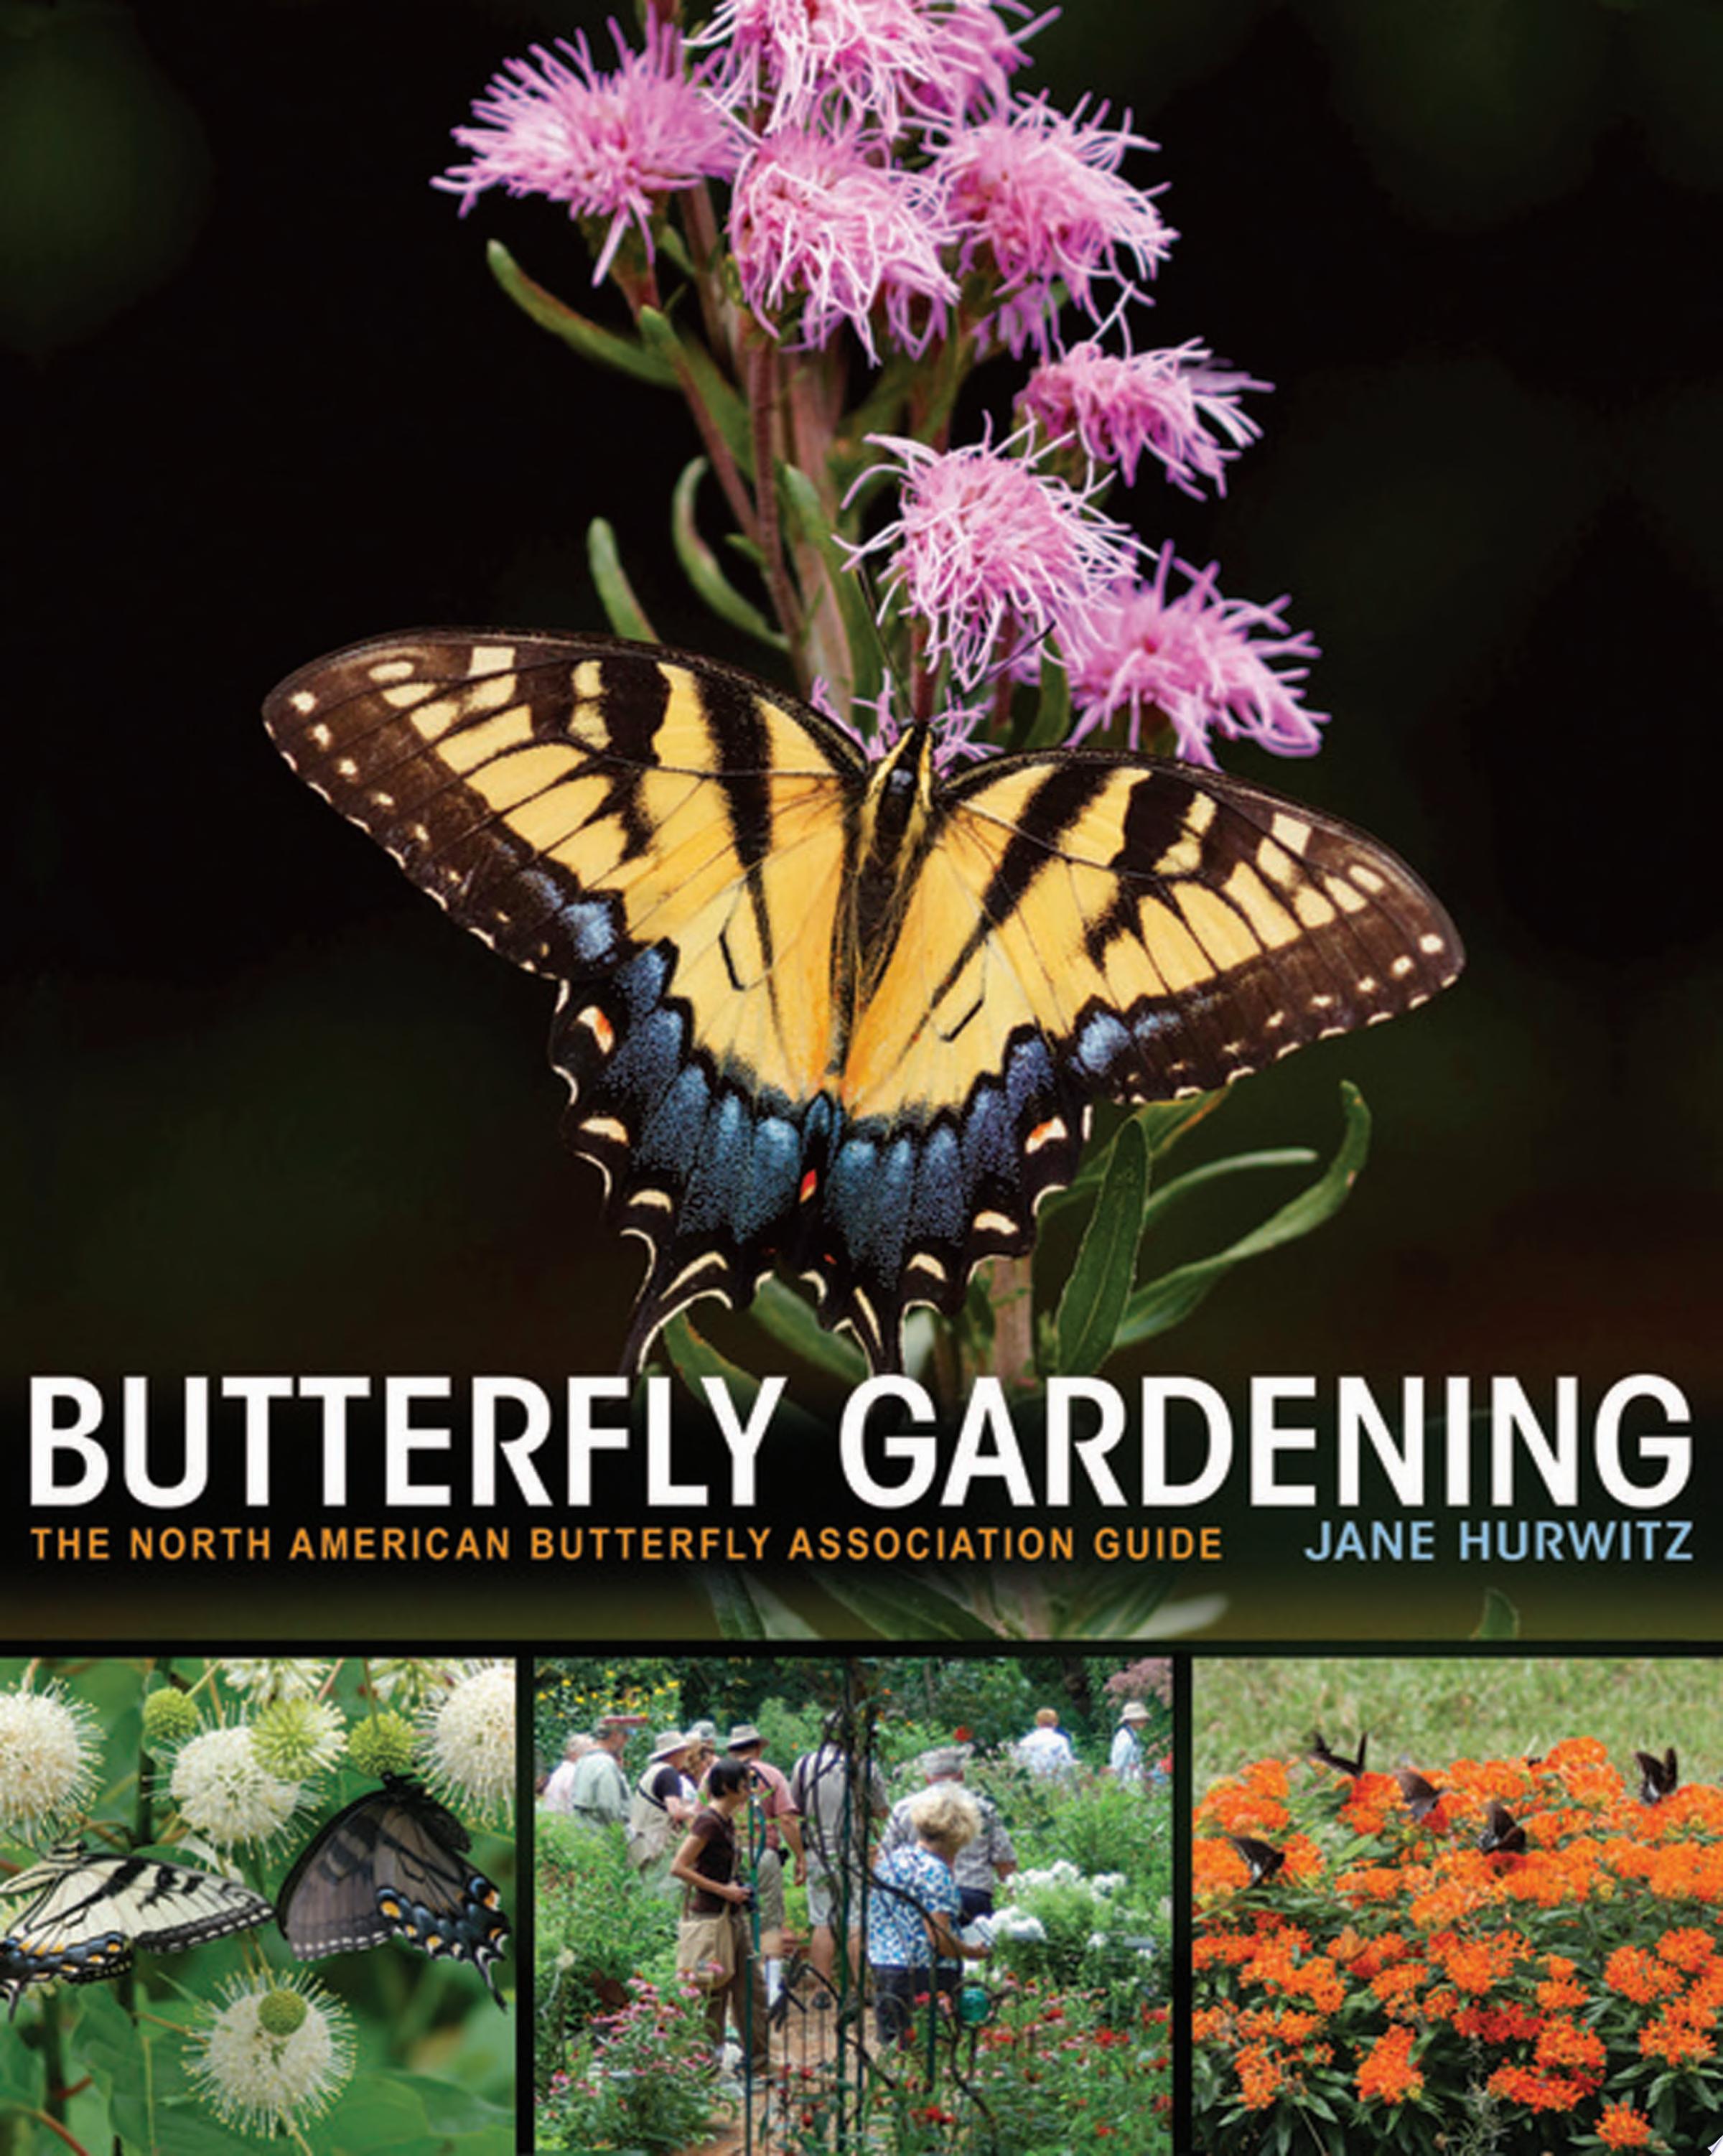 Image for "Butterfly Gardening"